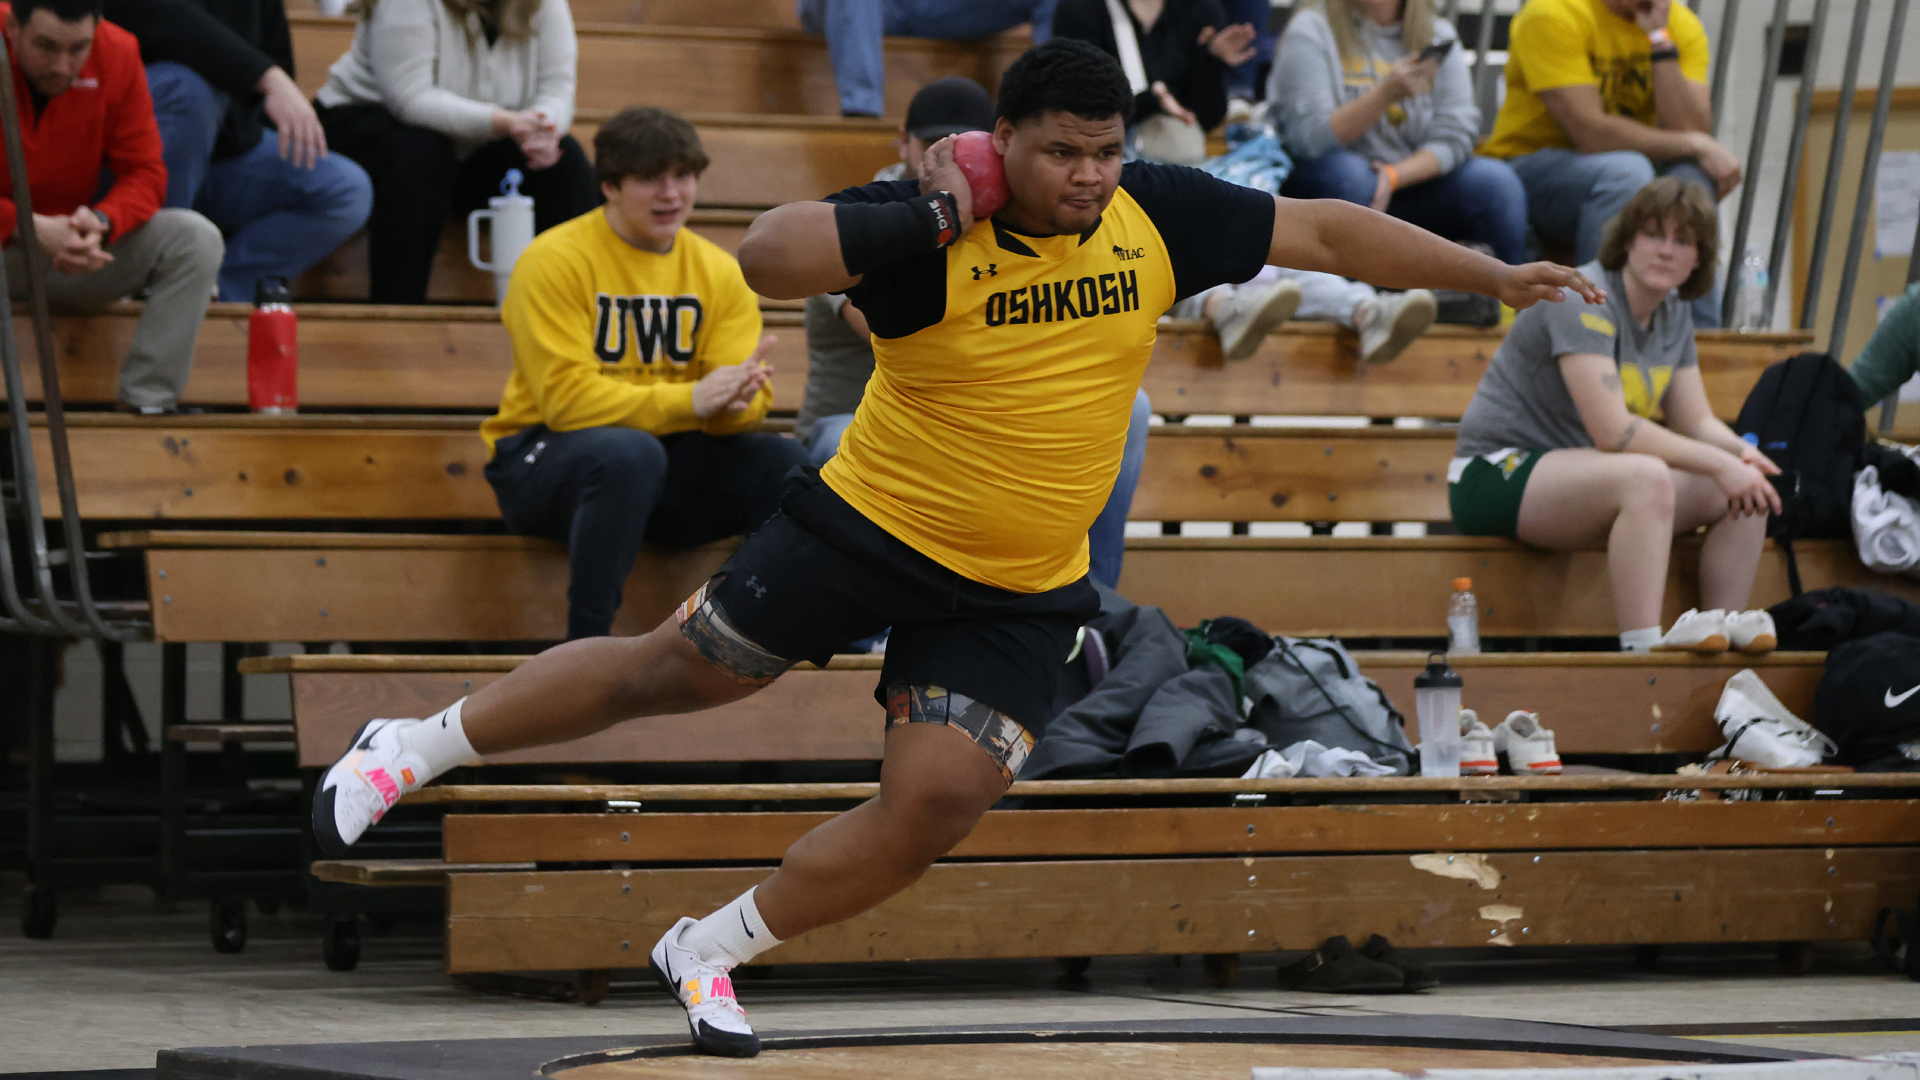 Isaiah Isom won the shot put, helping the Titans finish second at the Karl Schlender Invitational on Saturday